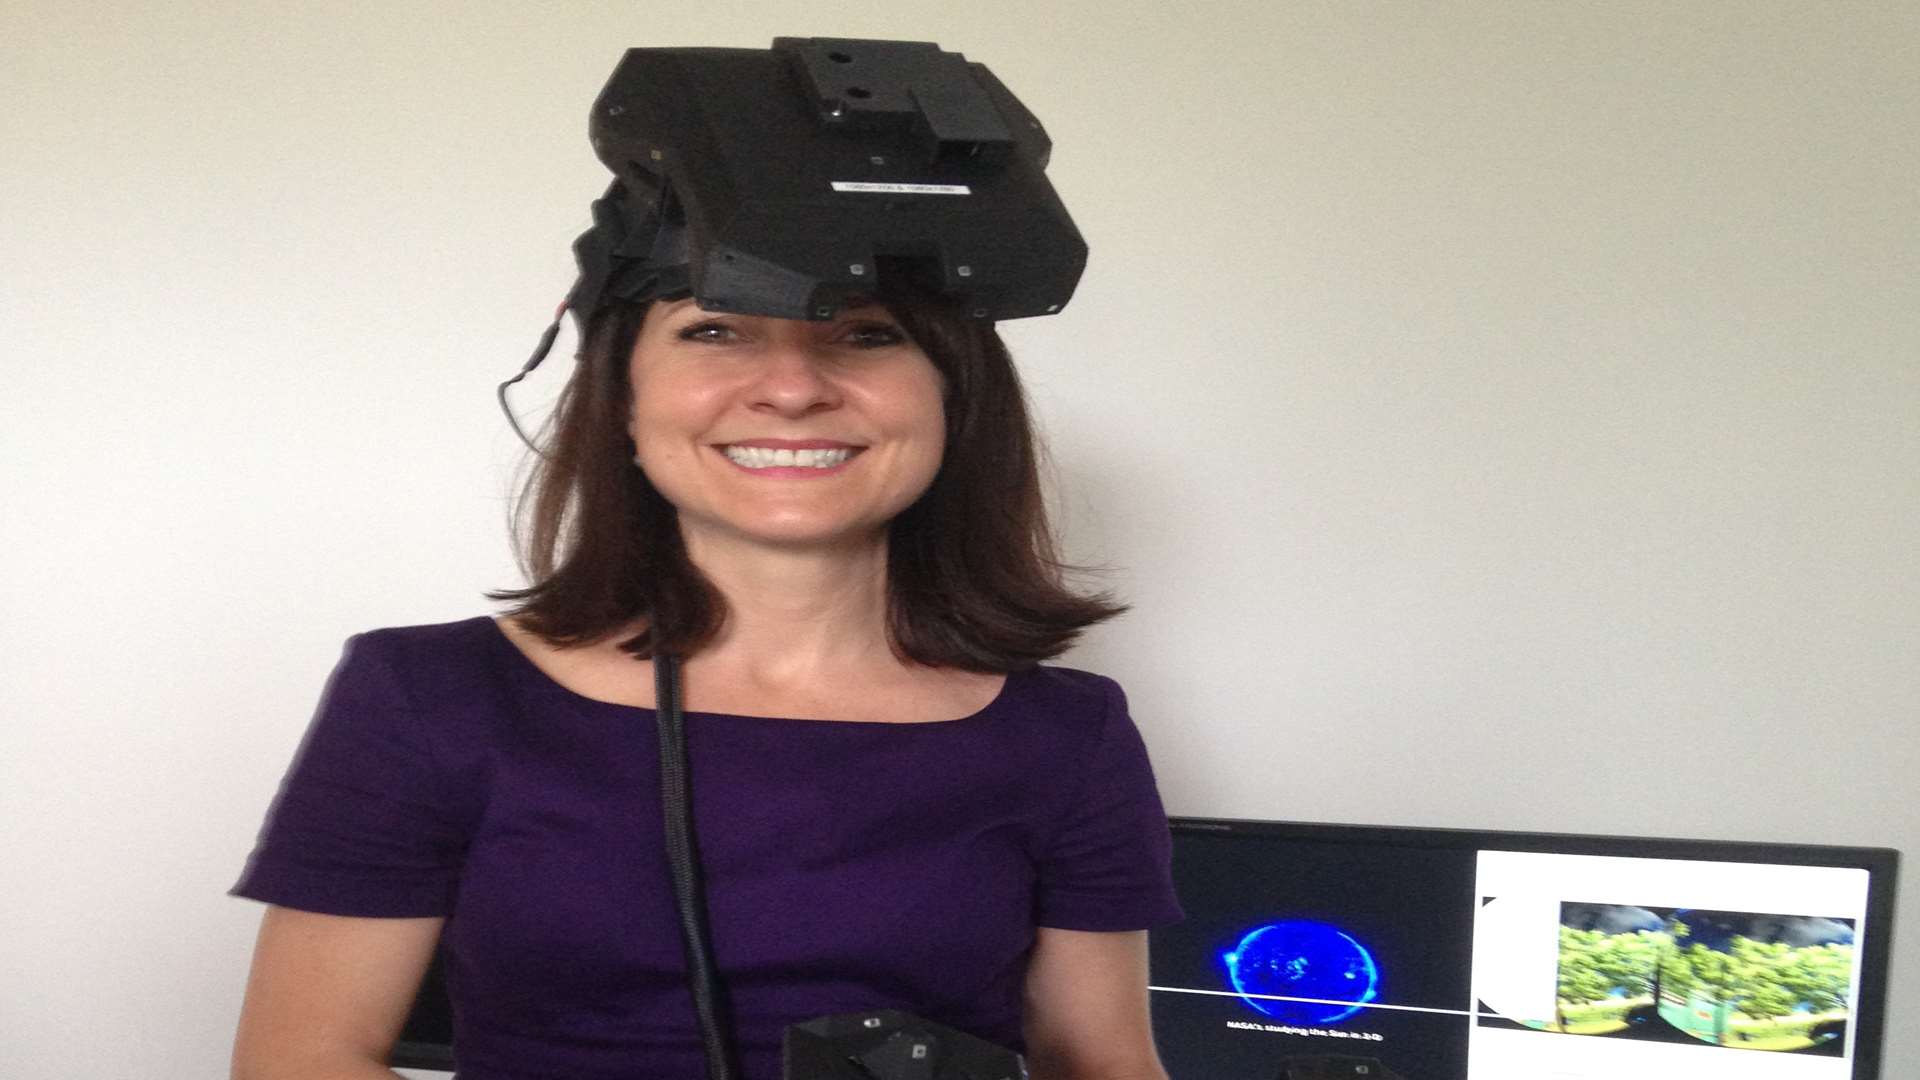 Liz Kendall trying out the simulator at Dovetail Games